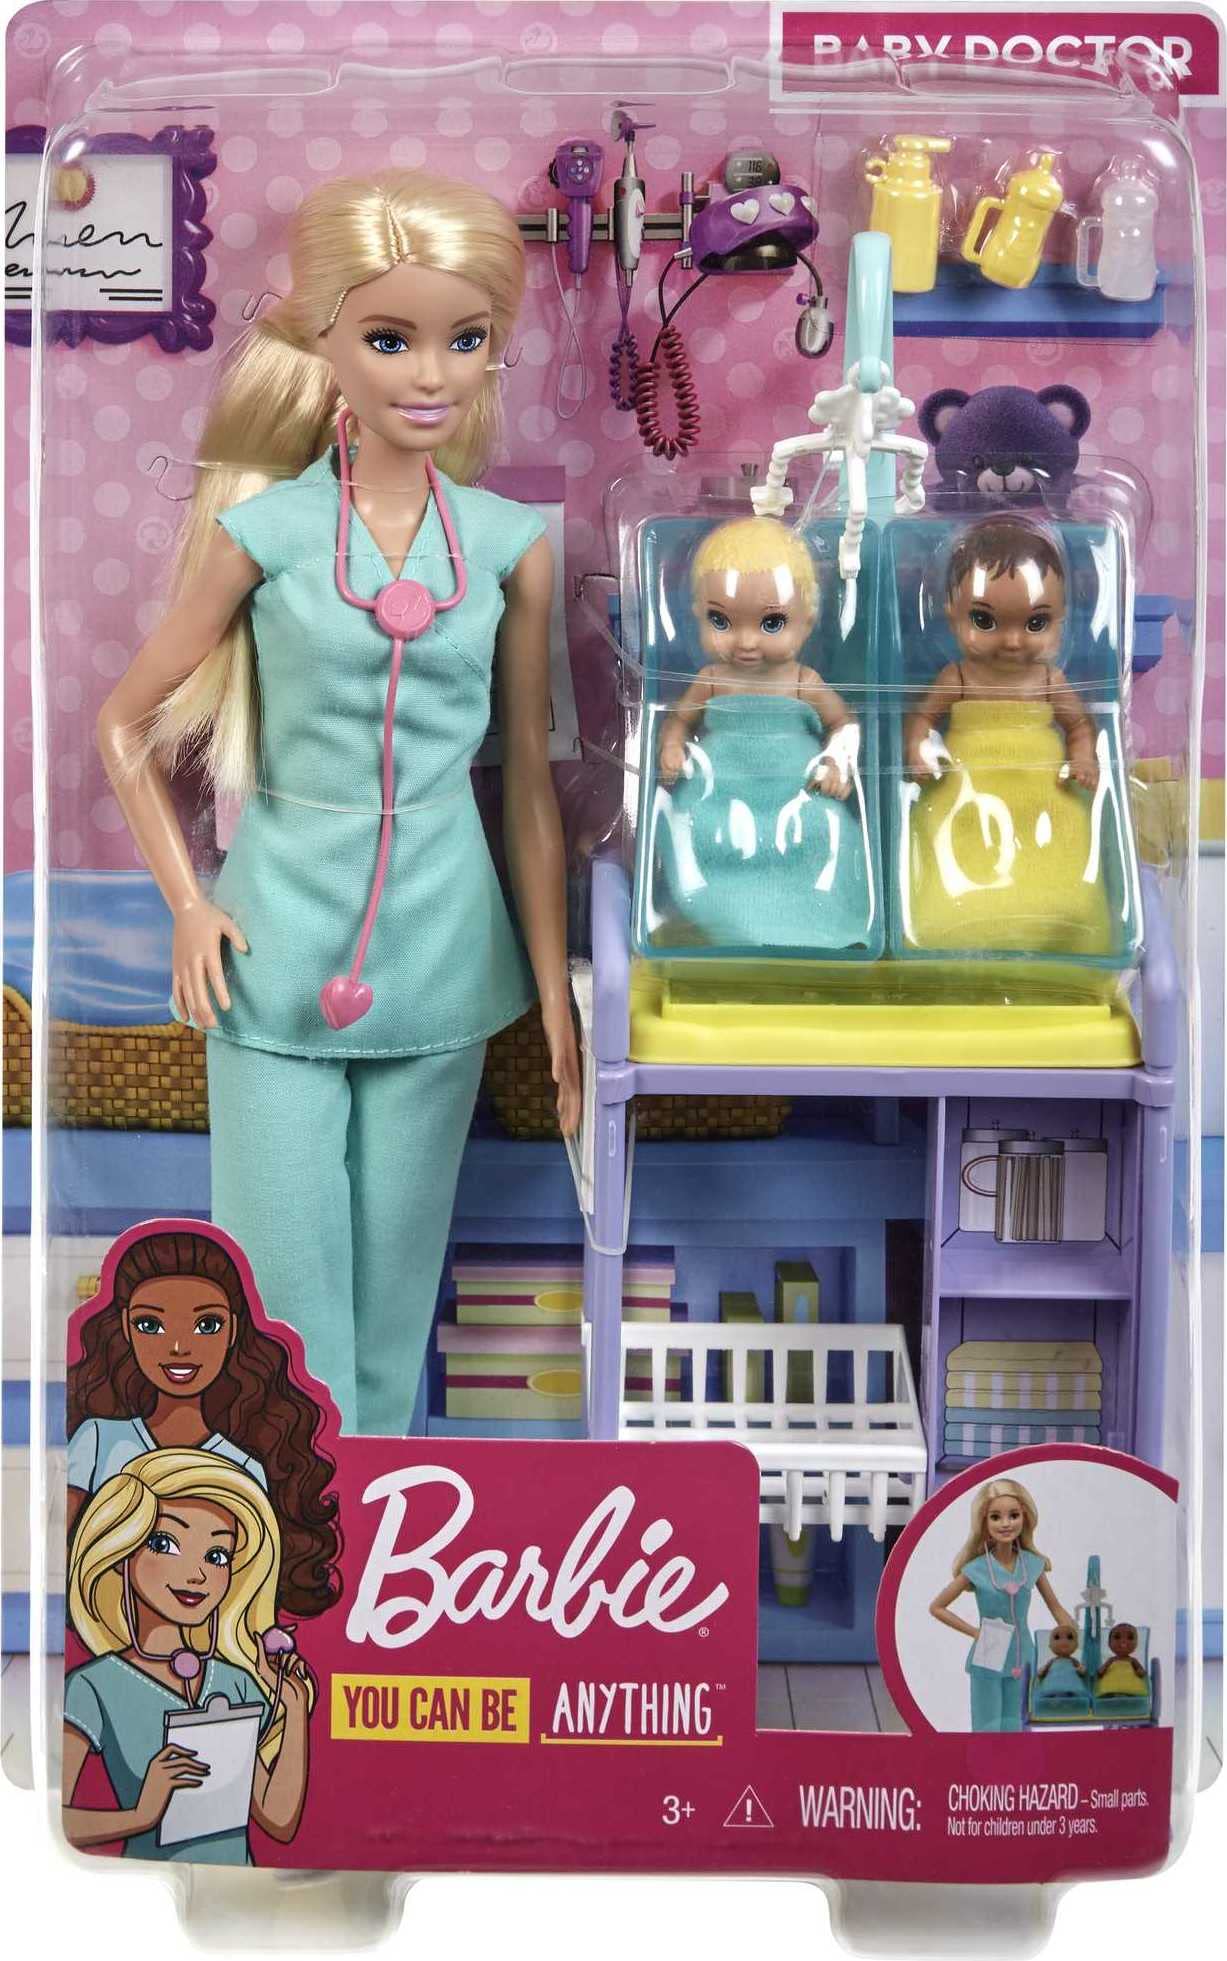 Barbie Careers Doll & Playset, Baby Doctor Theme with Blonde Fashion Doll, 2 Baby Dolls, Furniture & Accessories